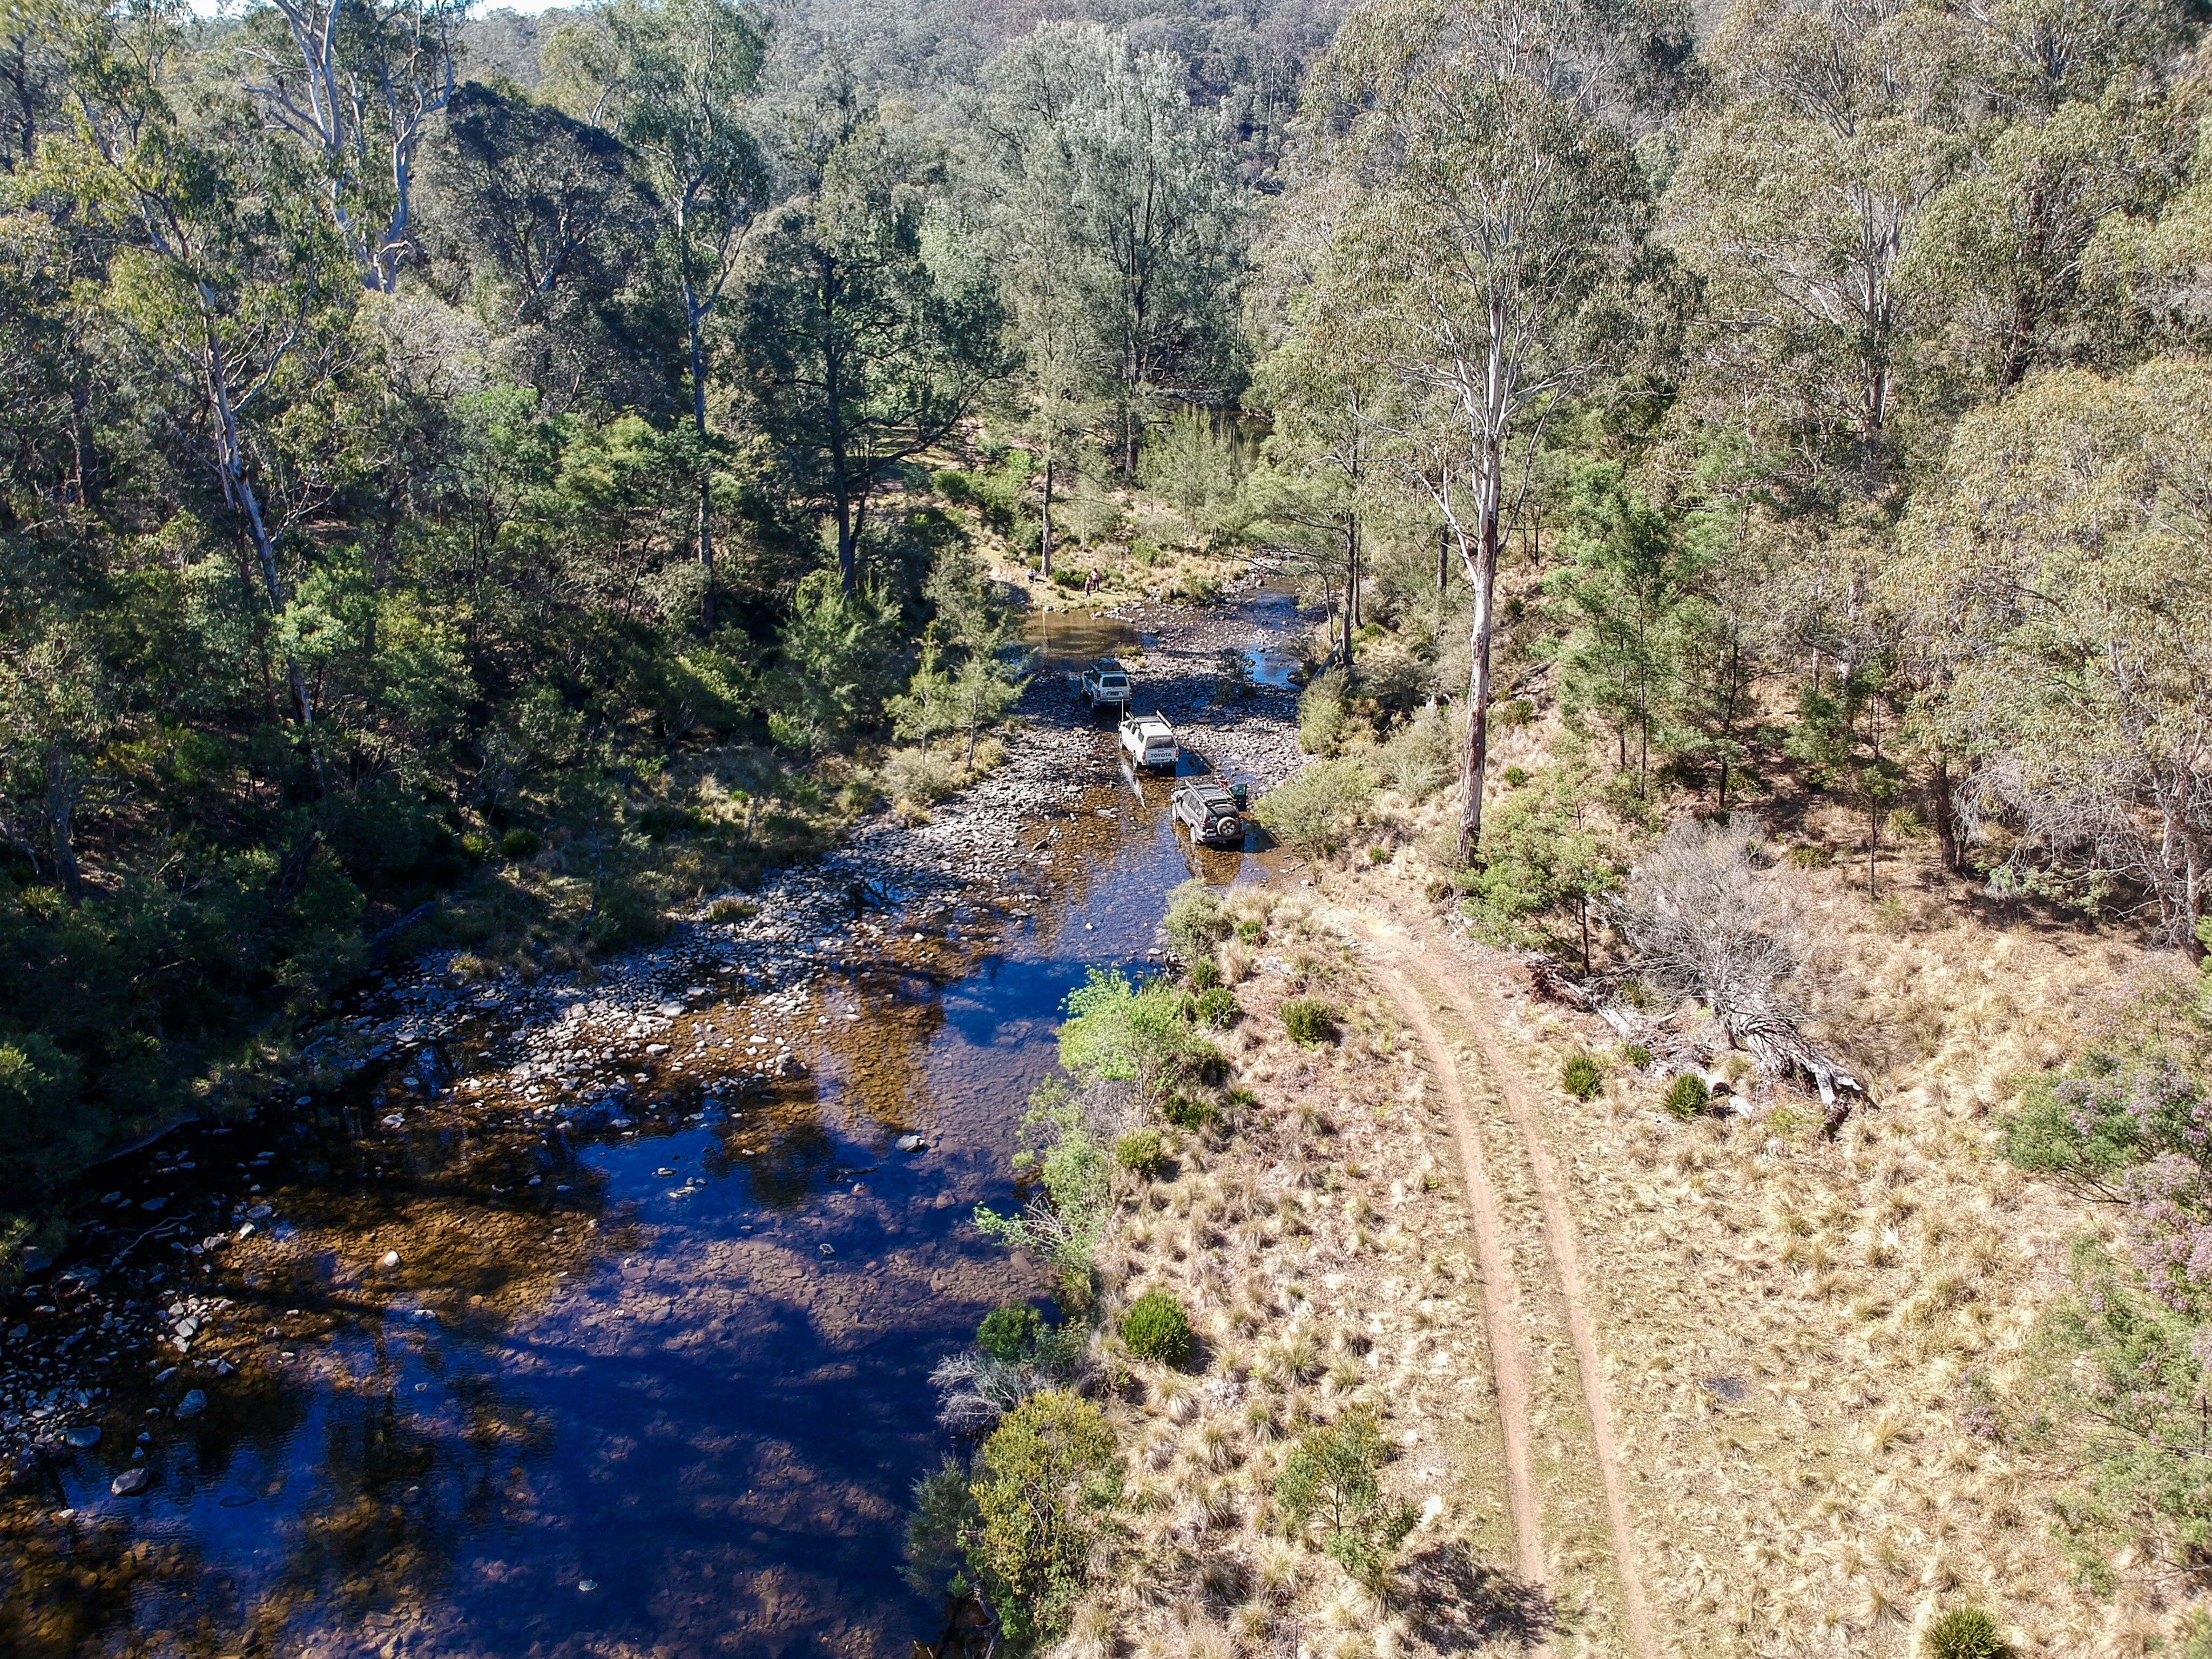 0d16235a/4x4 australia explore oxley wild national park crossing the stxy river jpg